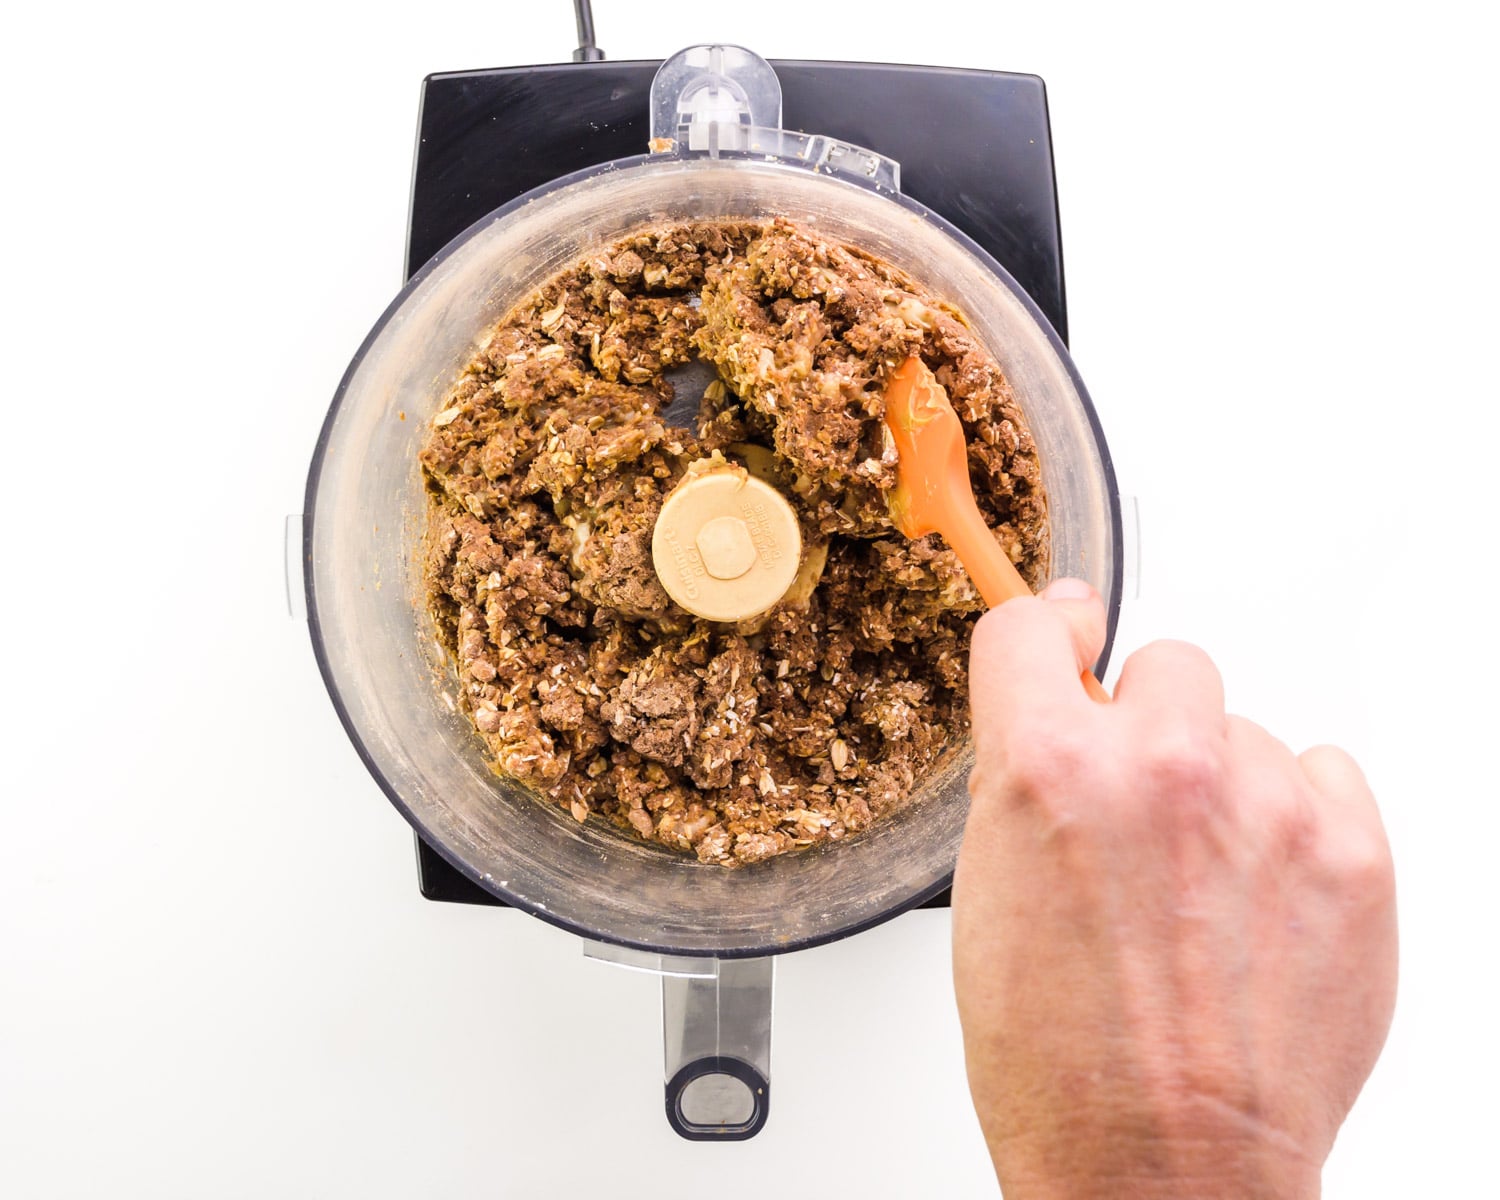 A hand holds a spatula, using it to push down ingredients in a food processor bowl.